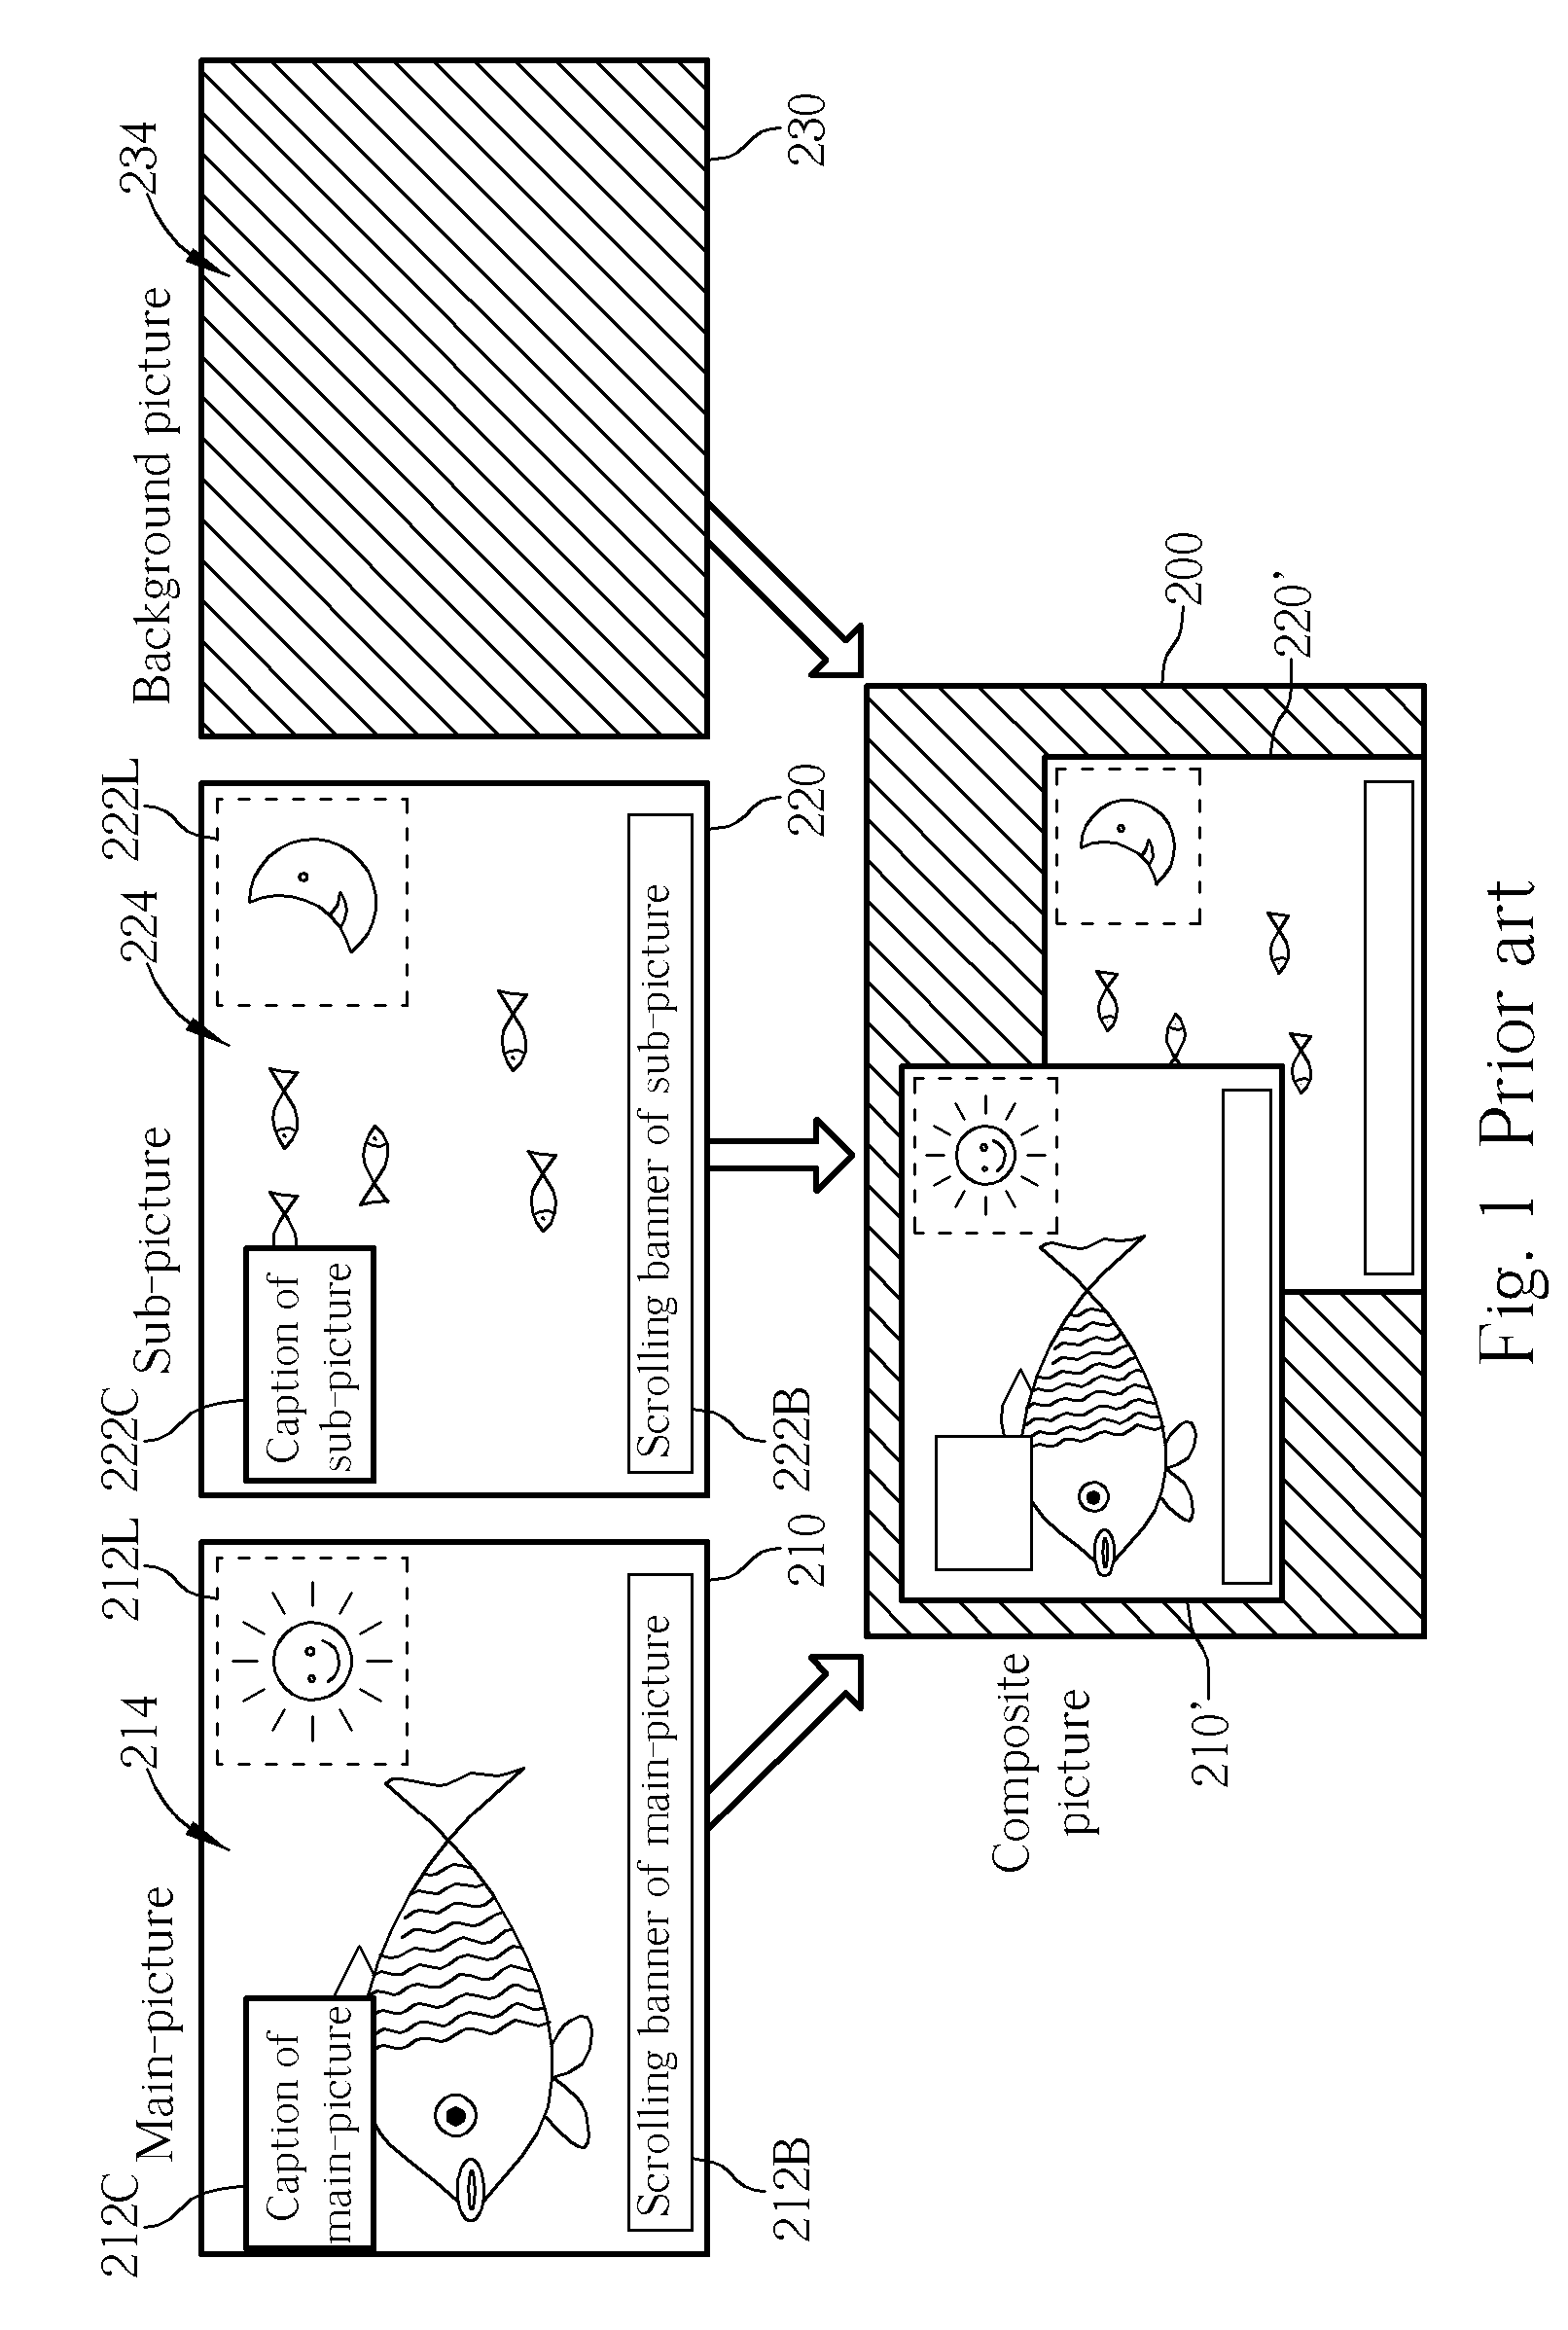 Video combining apparatus and method thereof